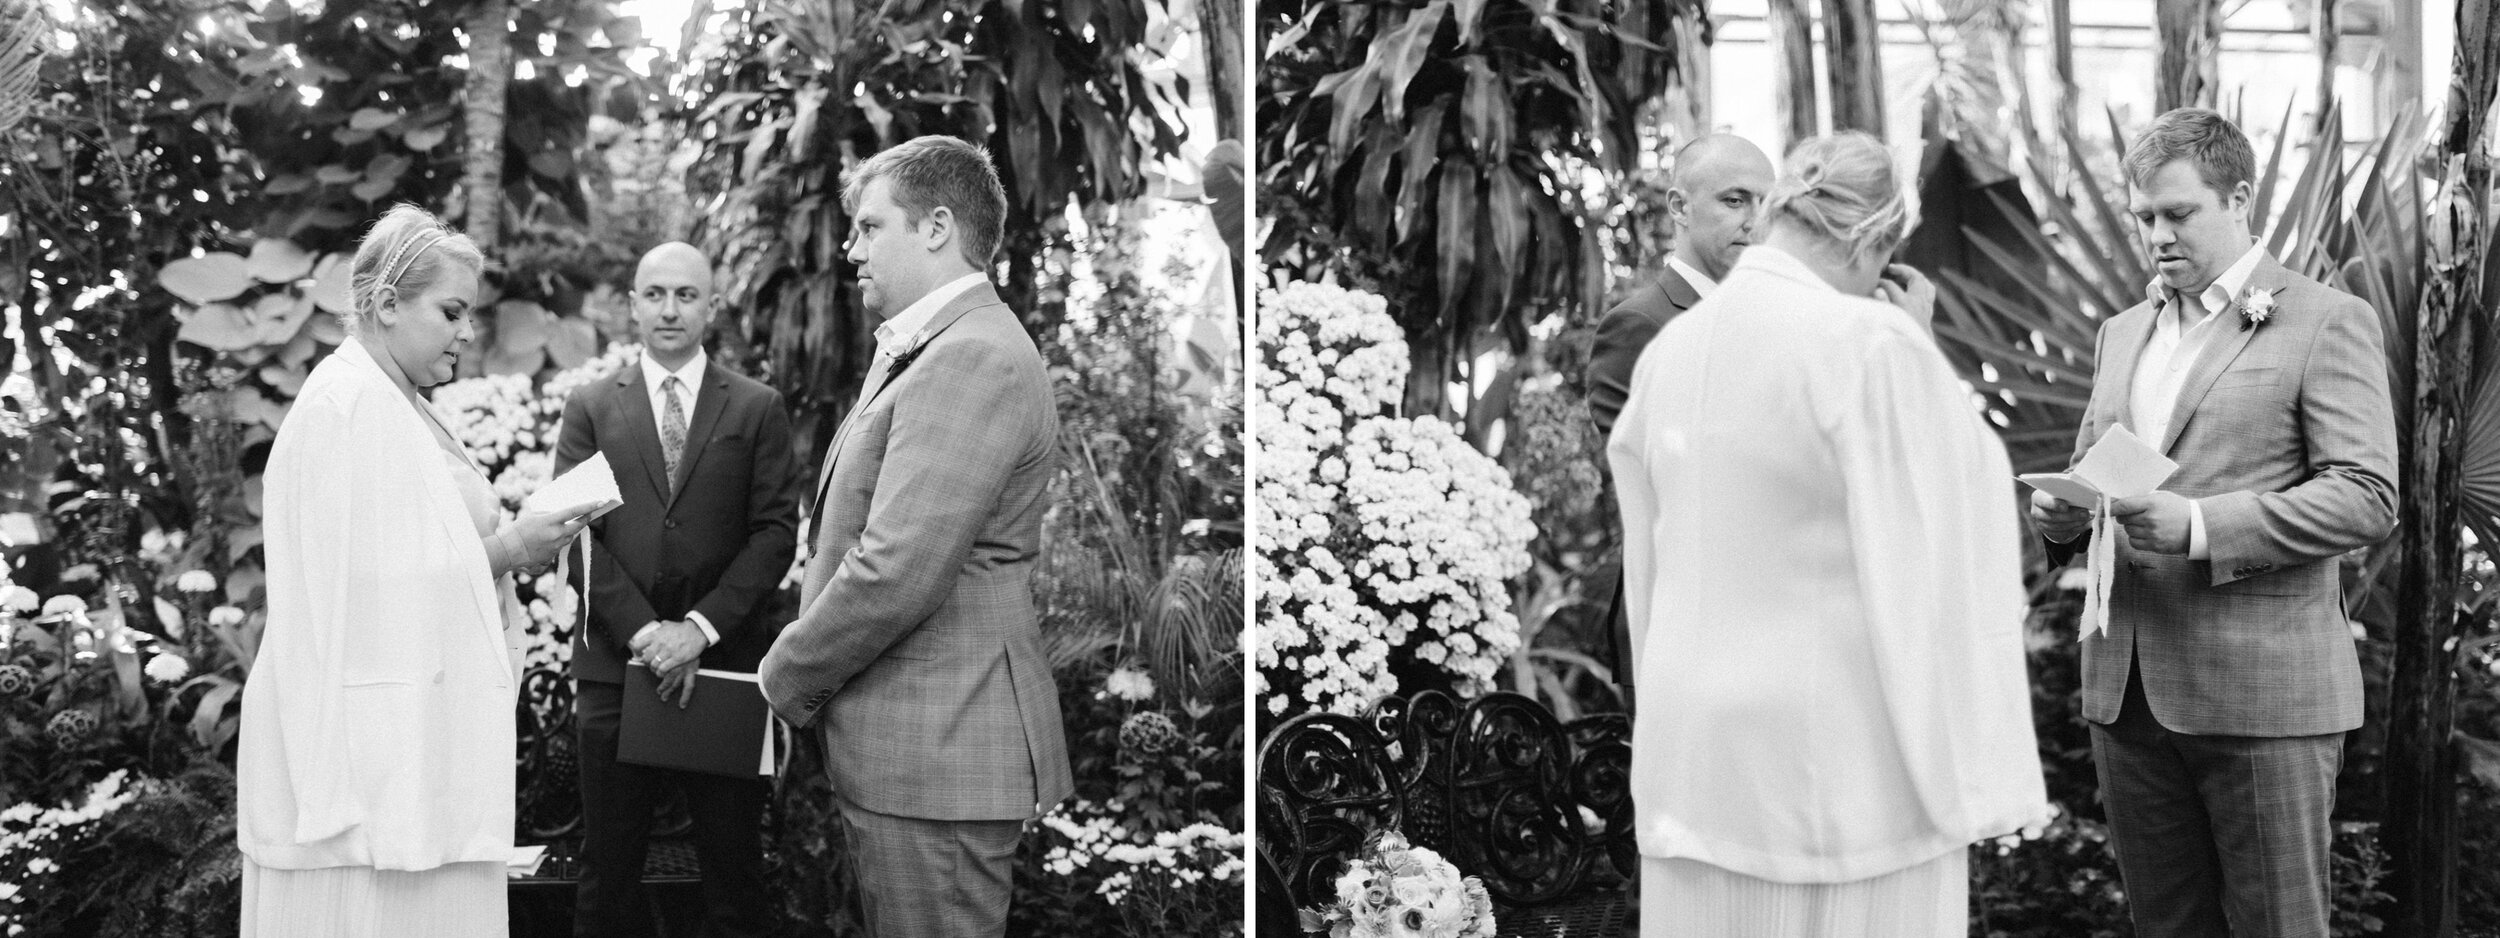 candid wedding ceremony photograph from and intimate allen gardens elopement